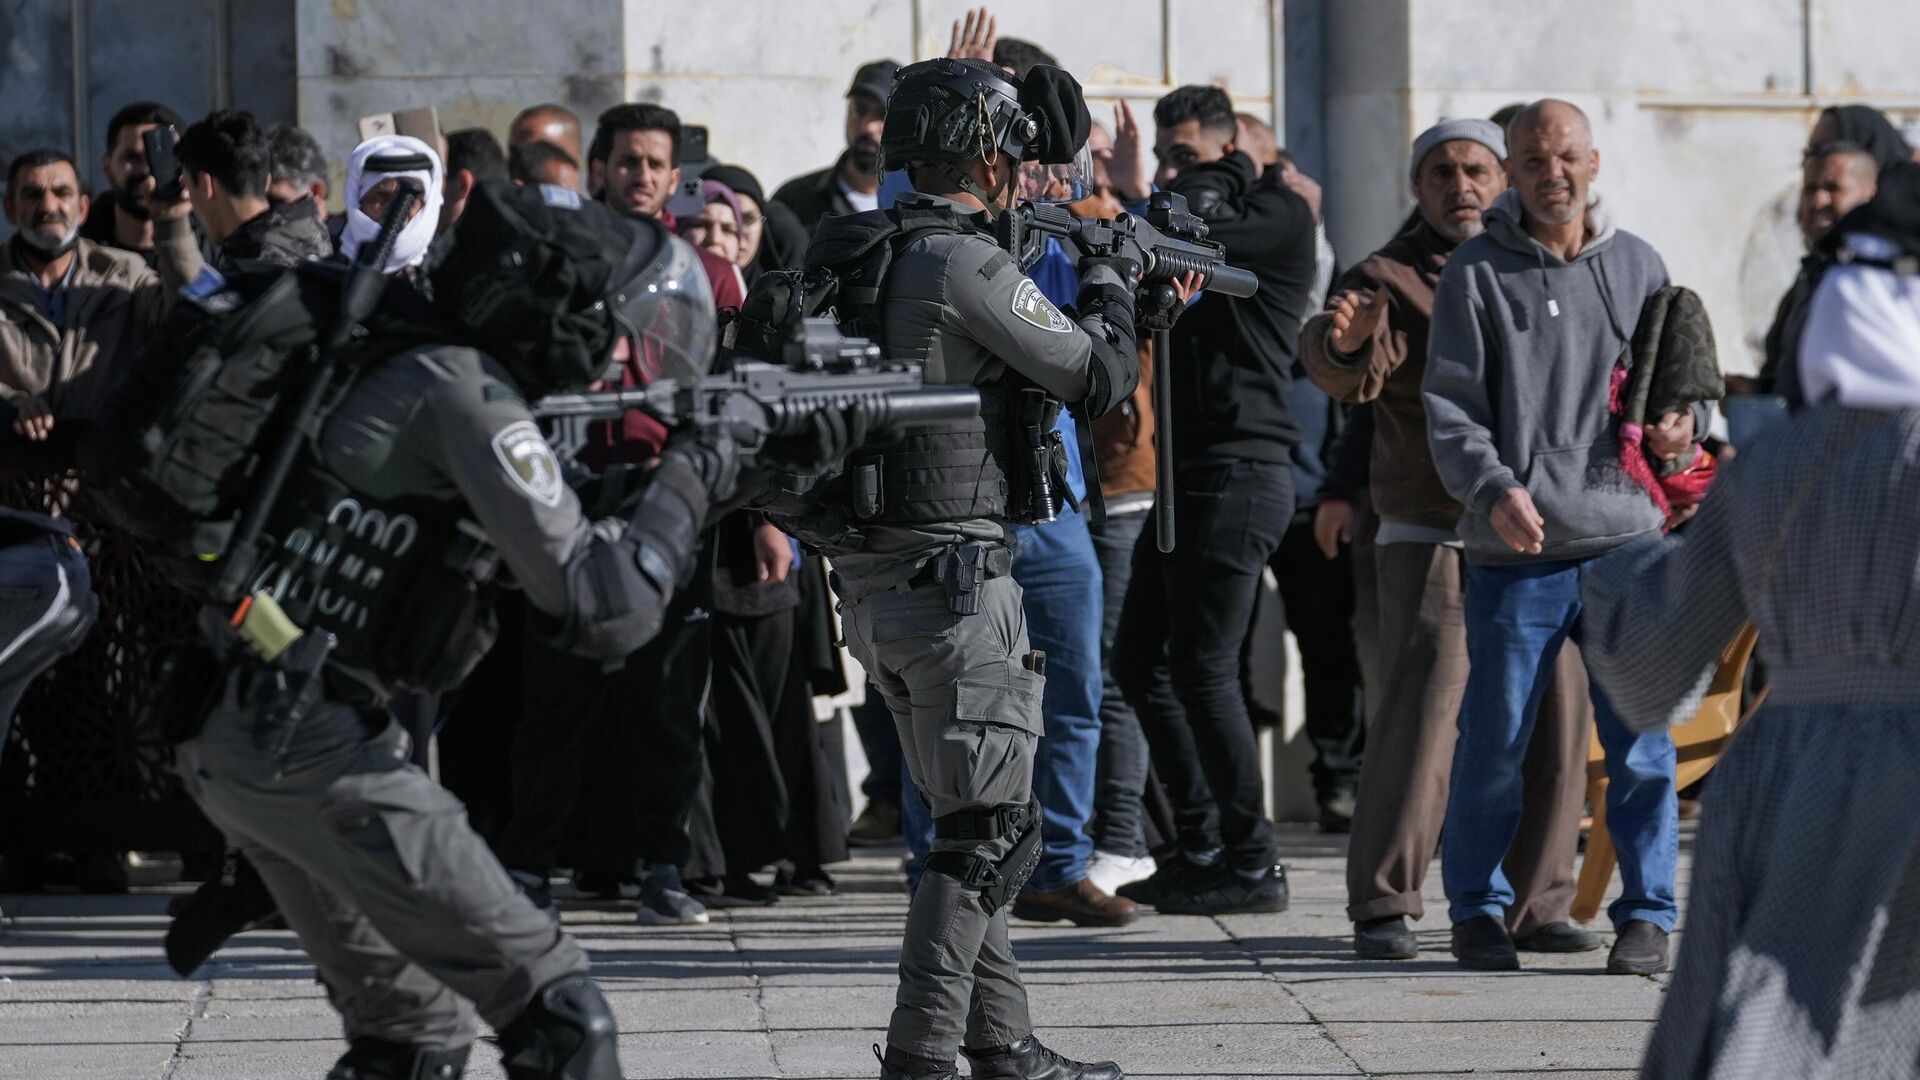 Israeli security forces take position during clashes with Palestinians demonstrators at the Al Aqsa Mosque compound in Jerusalem's Old City, Friday, April 15, 2022. - Sputnik International, 1920, 16.04.2022